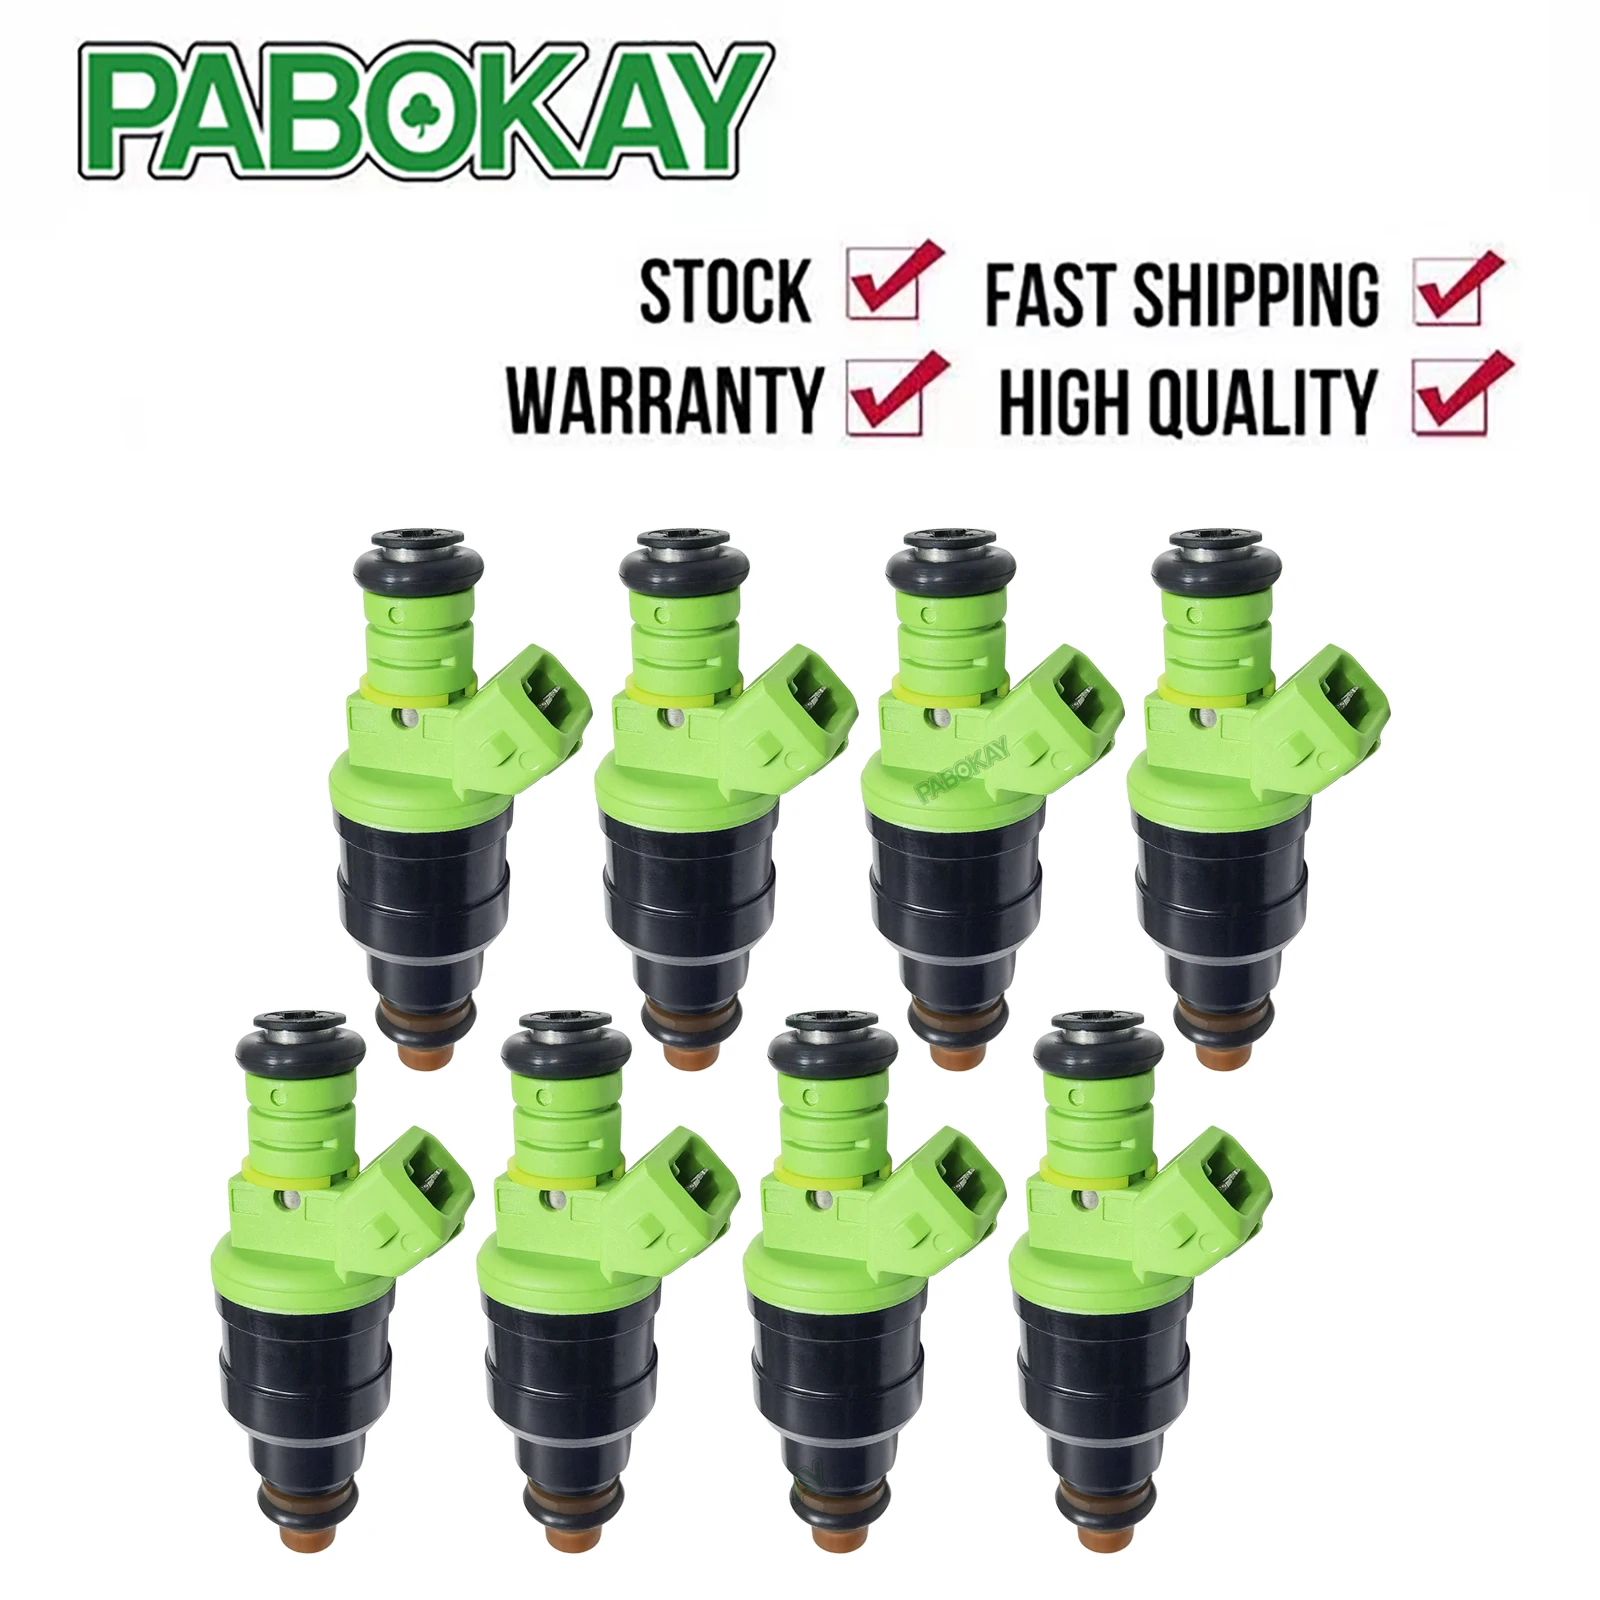 

8 pieces x Green Top Racing Fuel Injector For VW AUDI BMW FIAT FORD 440CC EV1 Turbo 42lb/hr 0280150558